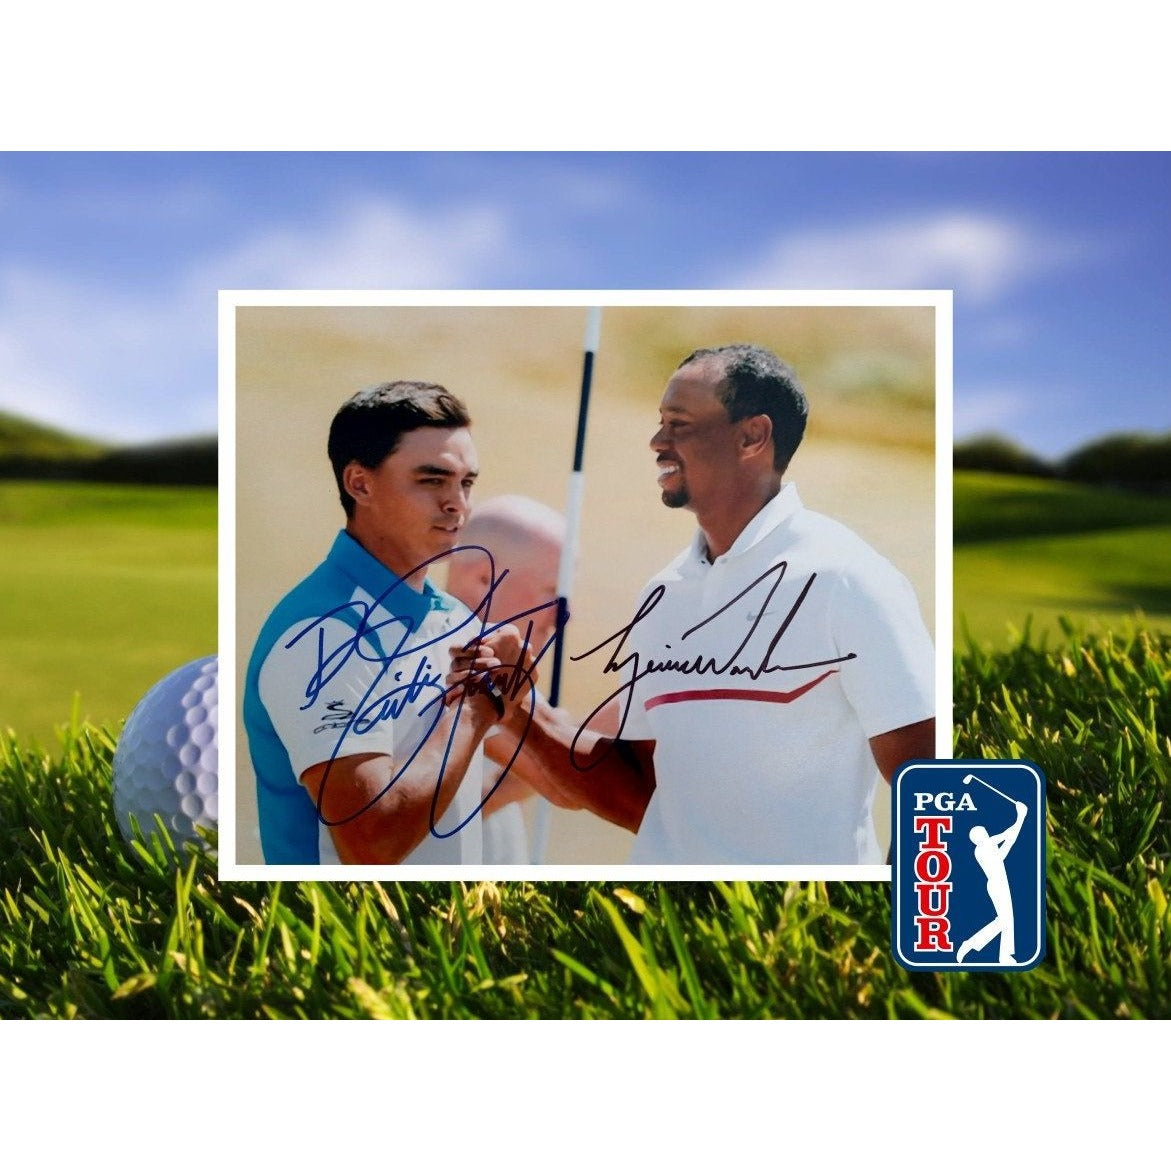 Rickie Fowler and Tiger Woods 8 x 10 photo signed with proof